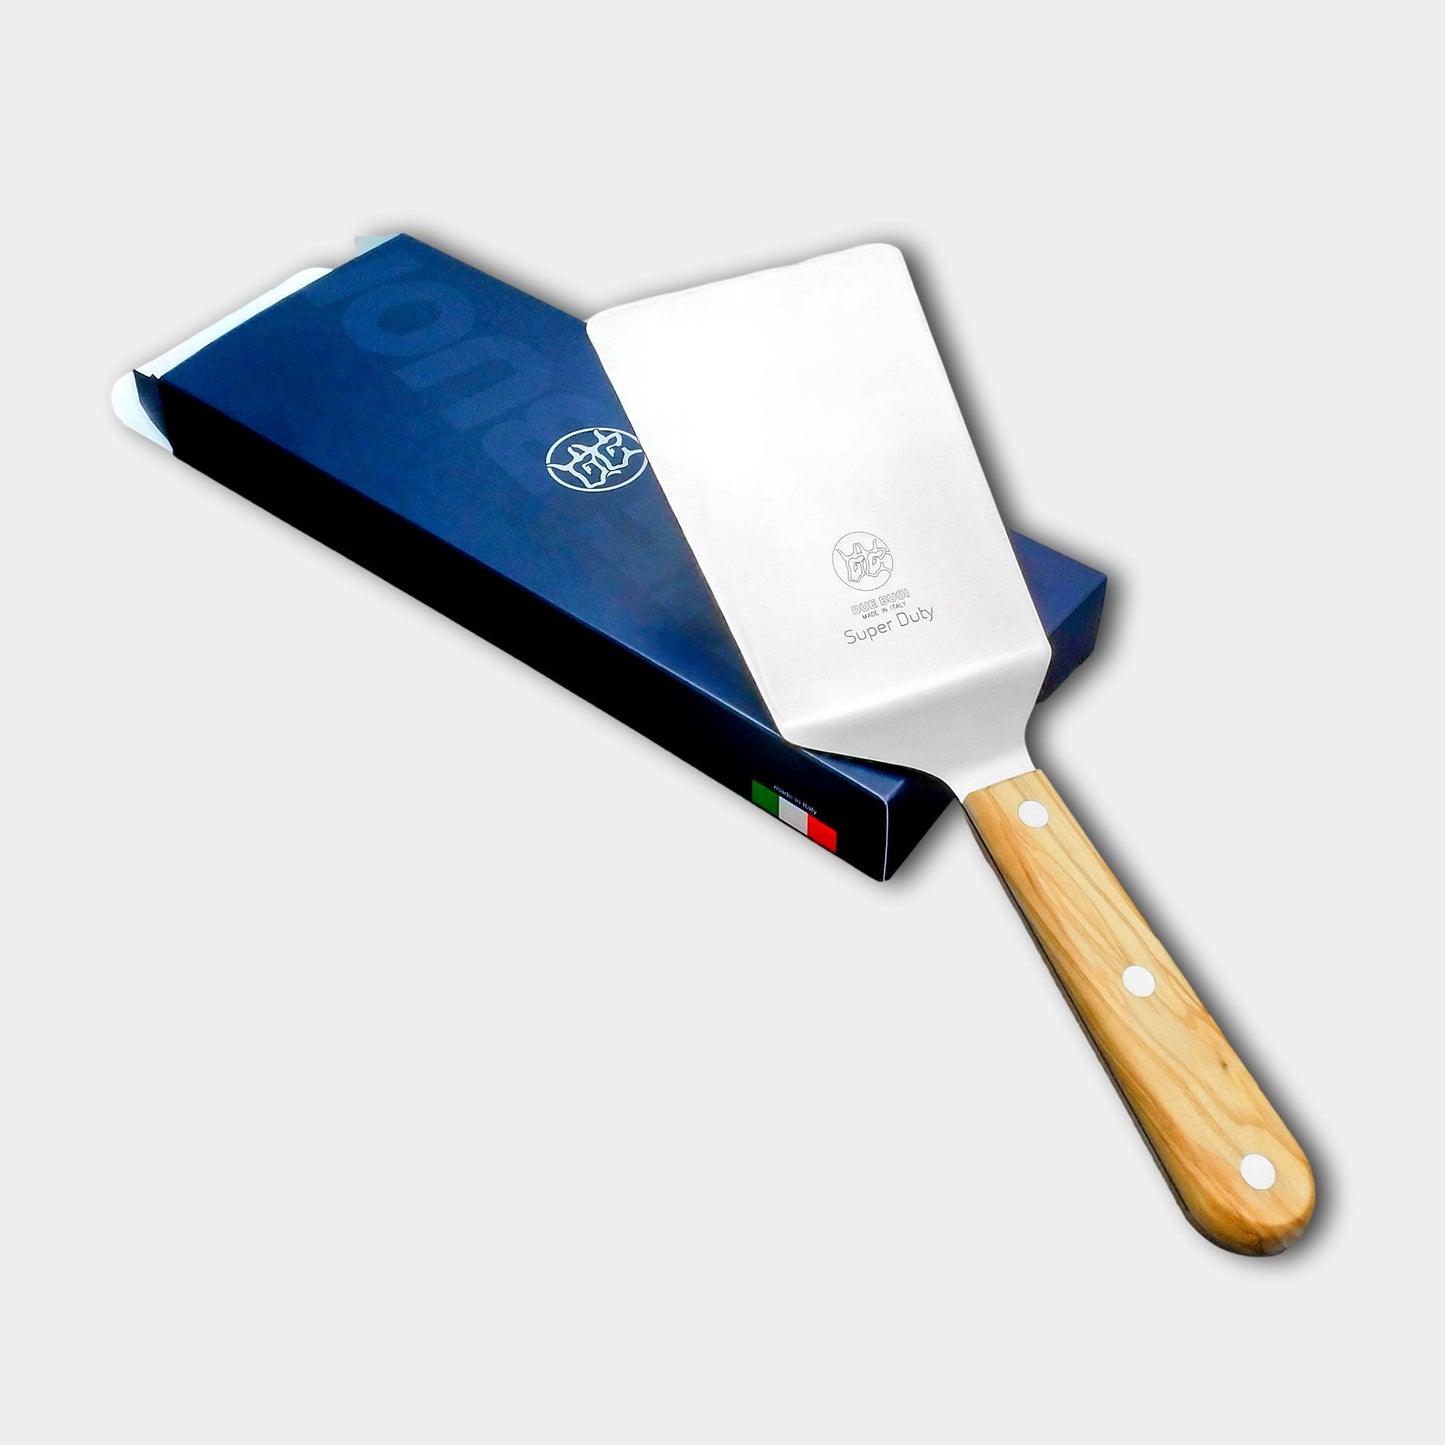 
                  
                    Super Duty Wide Offset Spatula - Olive Wood Handle | DUE BUOI
                  
                